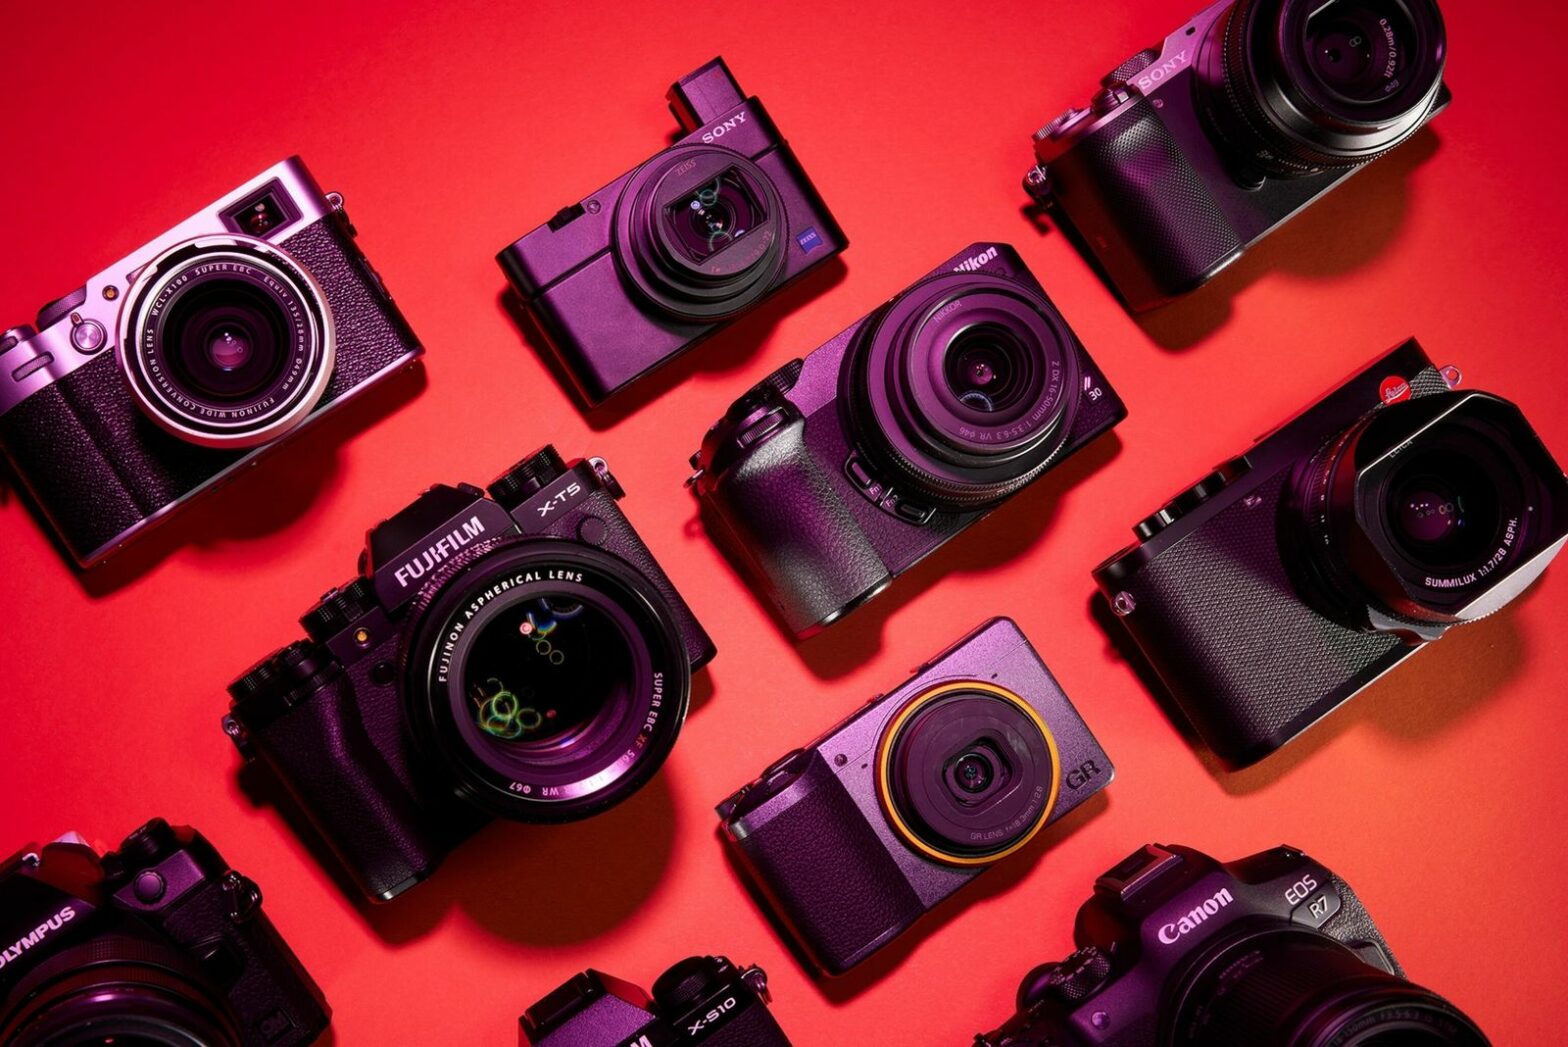 The 10 best compact cameras, according to National Geographic